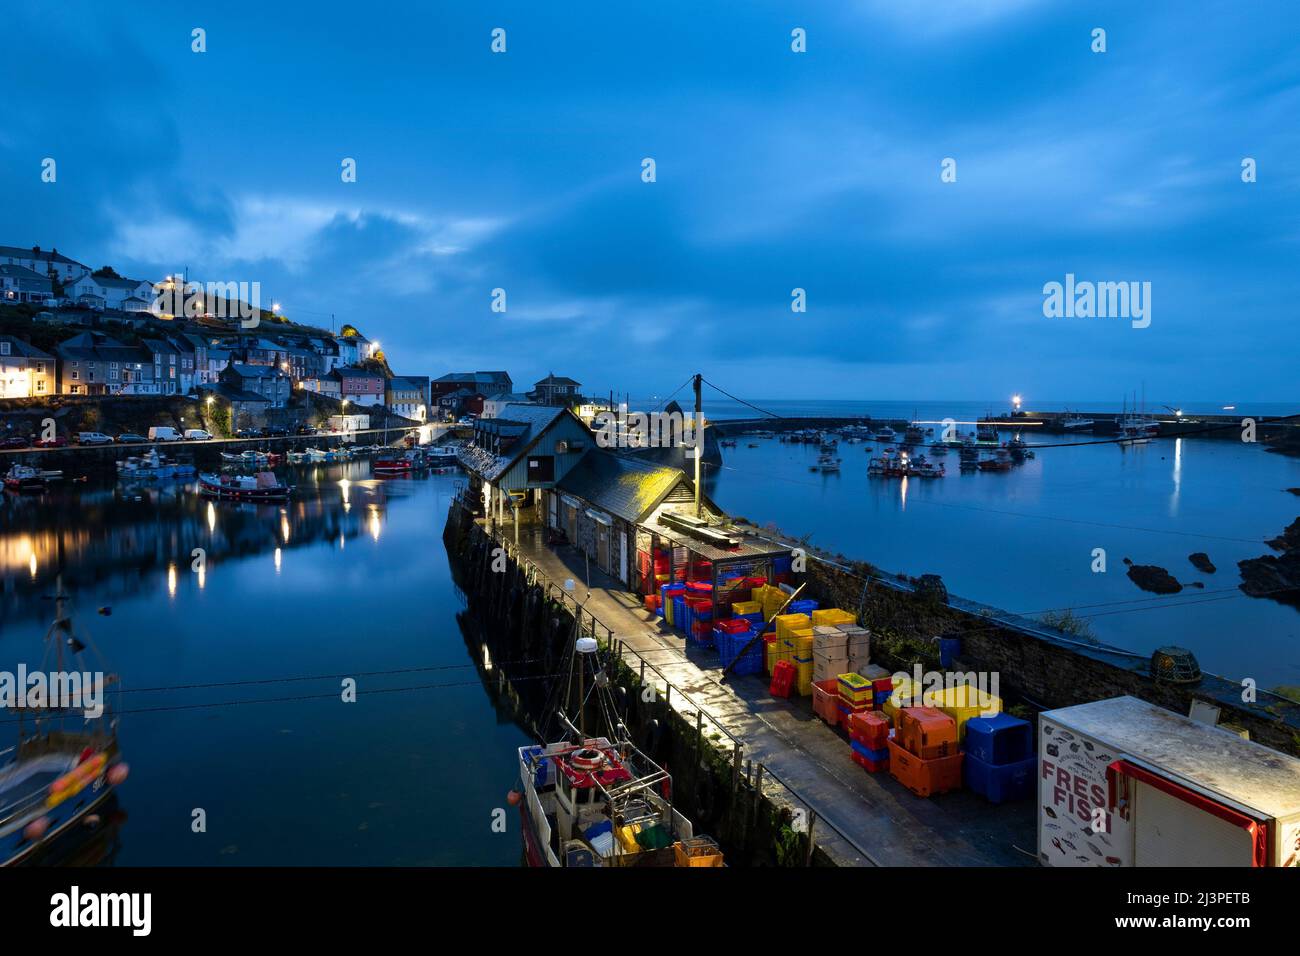 Uk fishing industry, mevagissey wet fish, early morning, mevagissey fishing harbour, cornwall Stock Photo